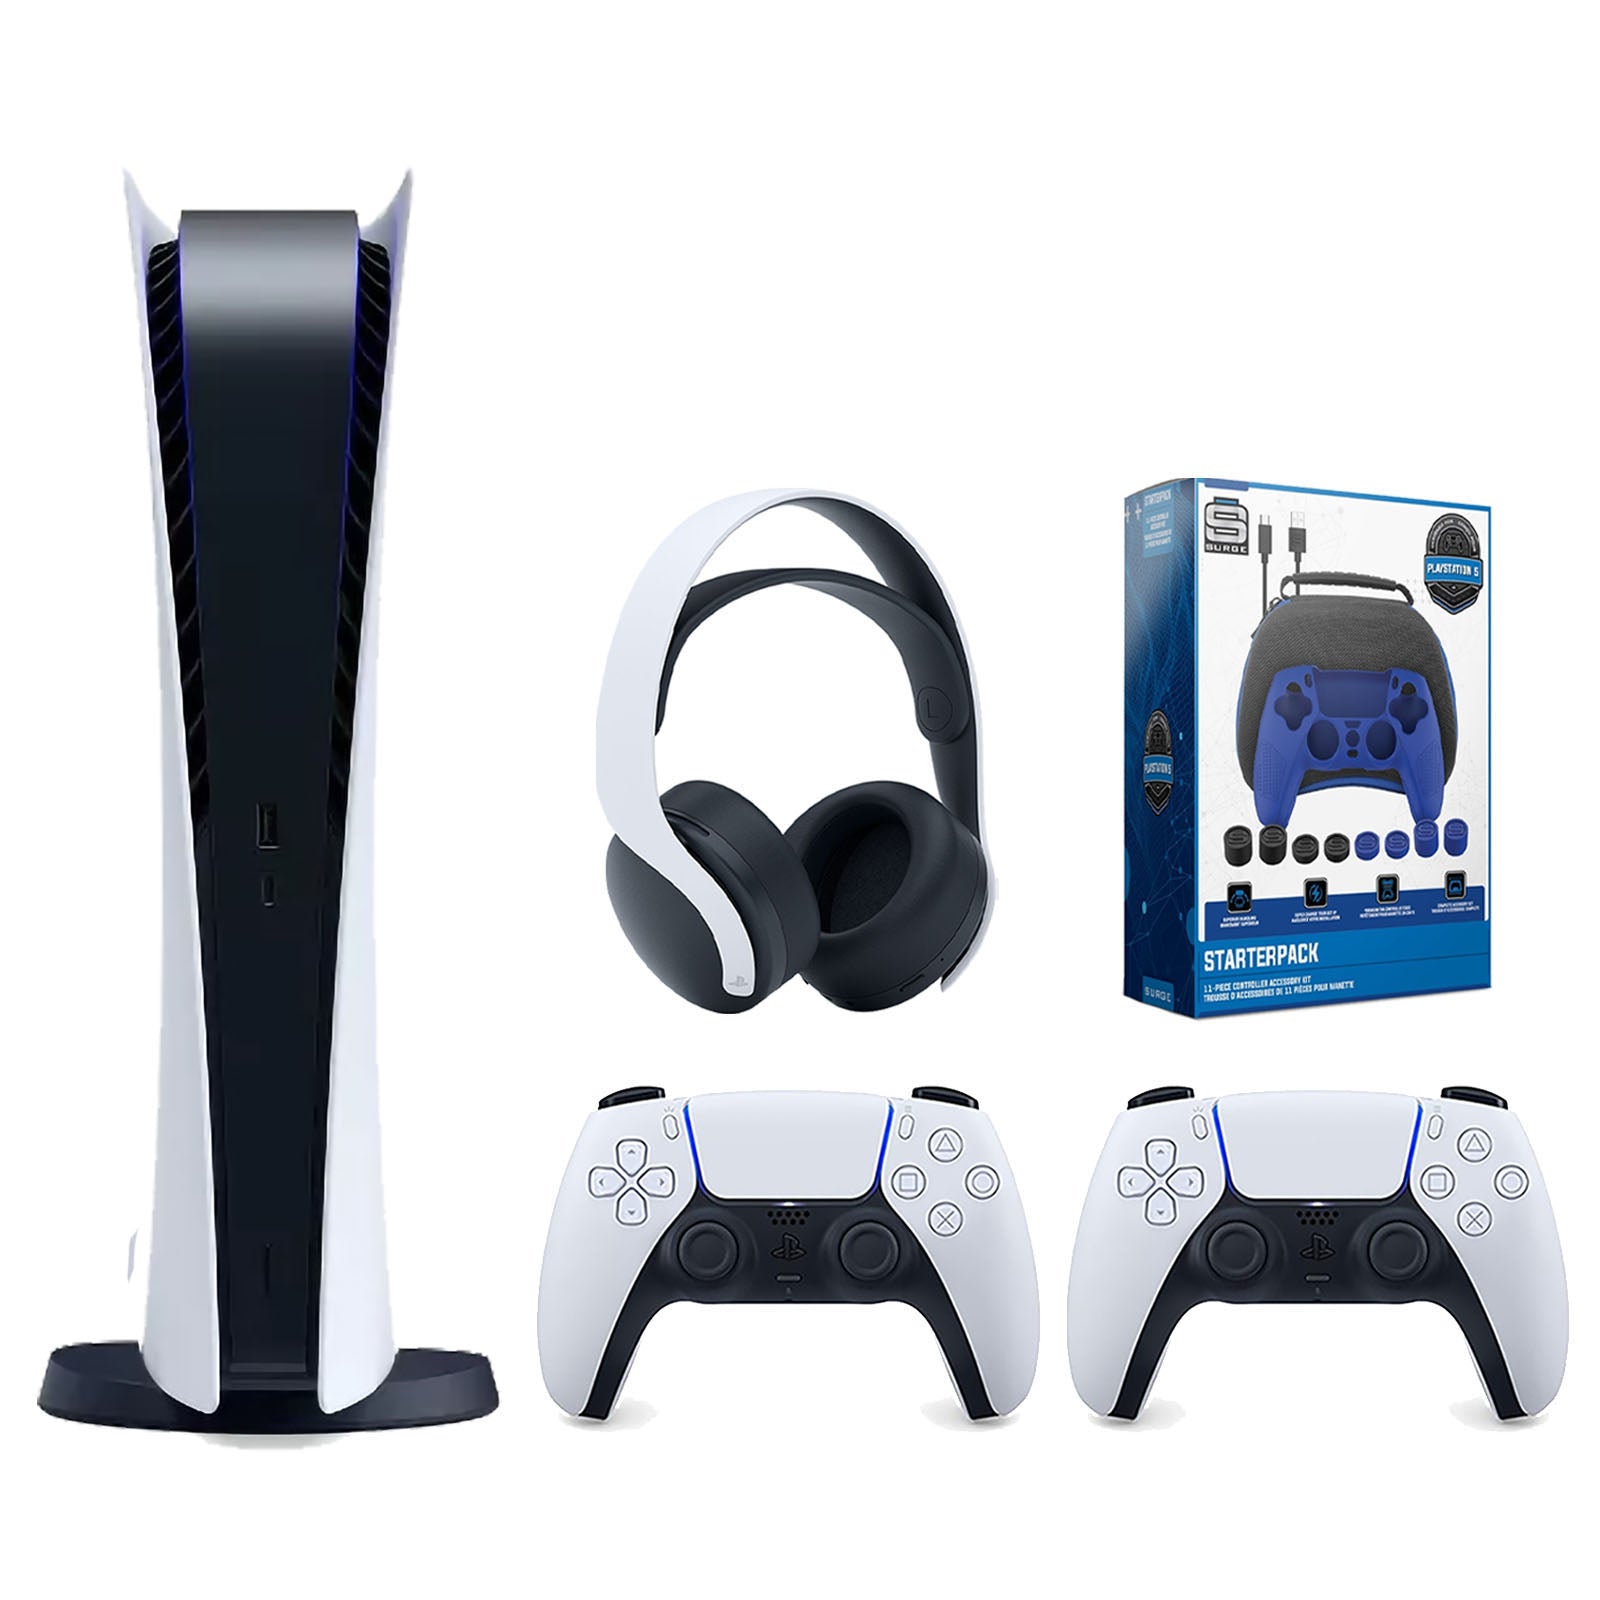 Sony Playstation 5 Digital Edition Console with Extra White Controller, White PULSE 3D Headset and Surge Pro Gamer Starter Pack 11-Piece Accessory Bundle - Pro-Distributing